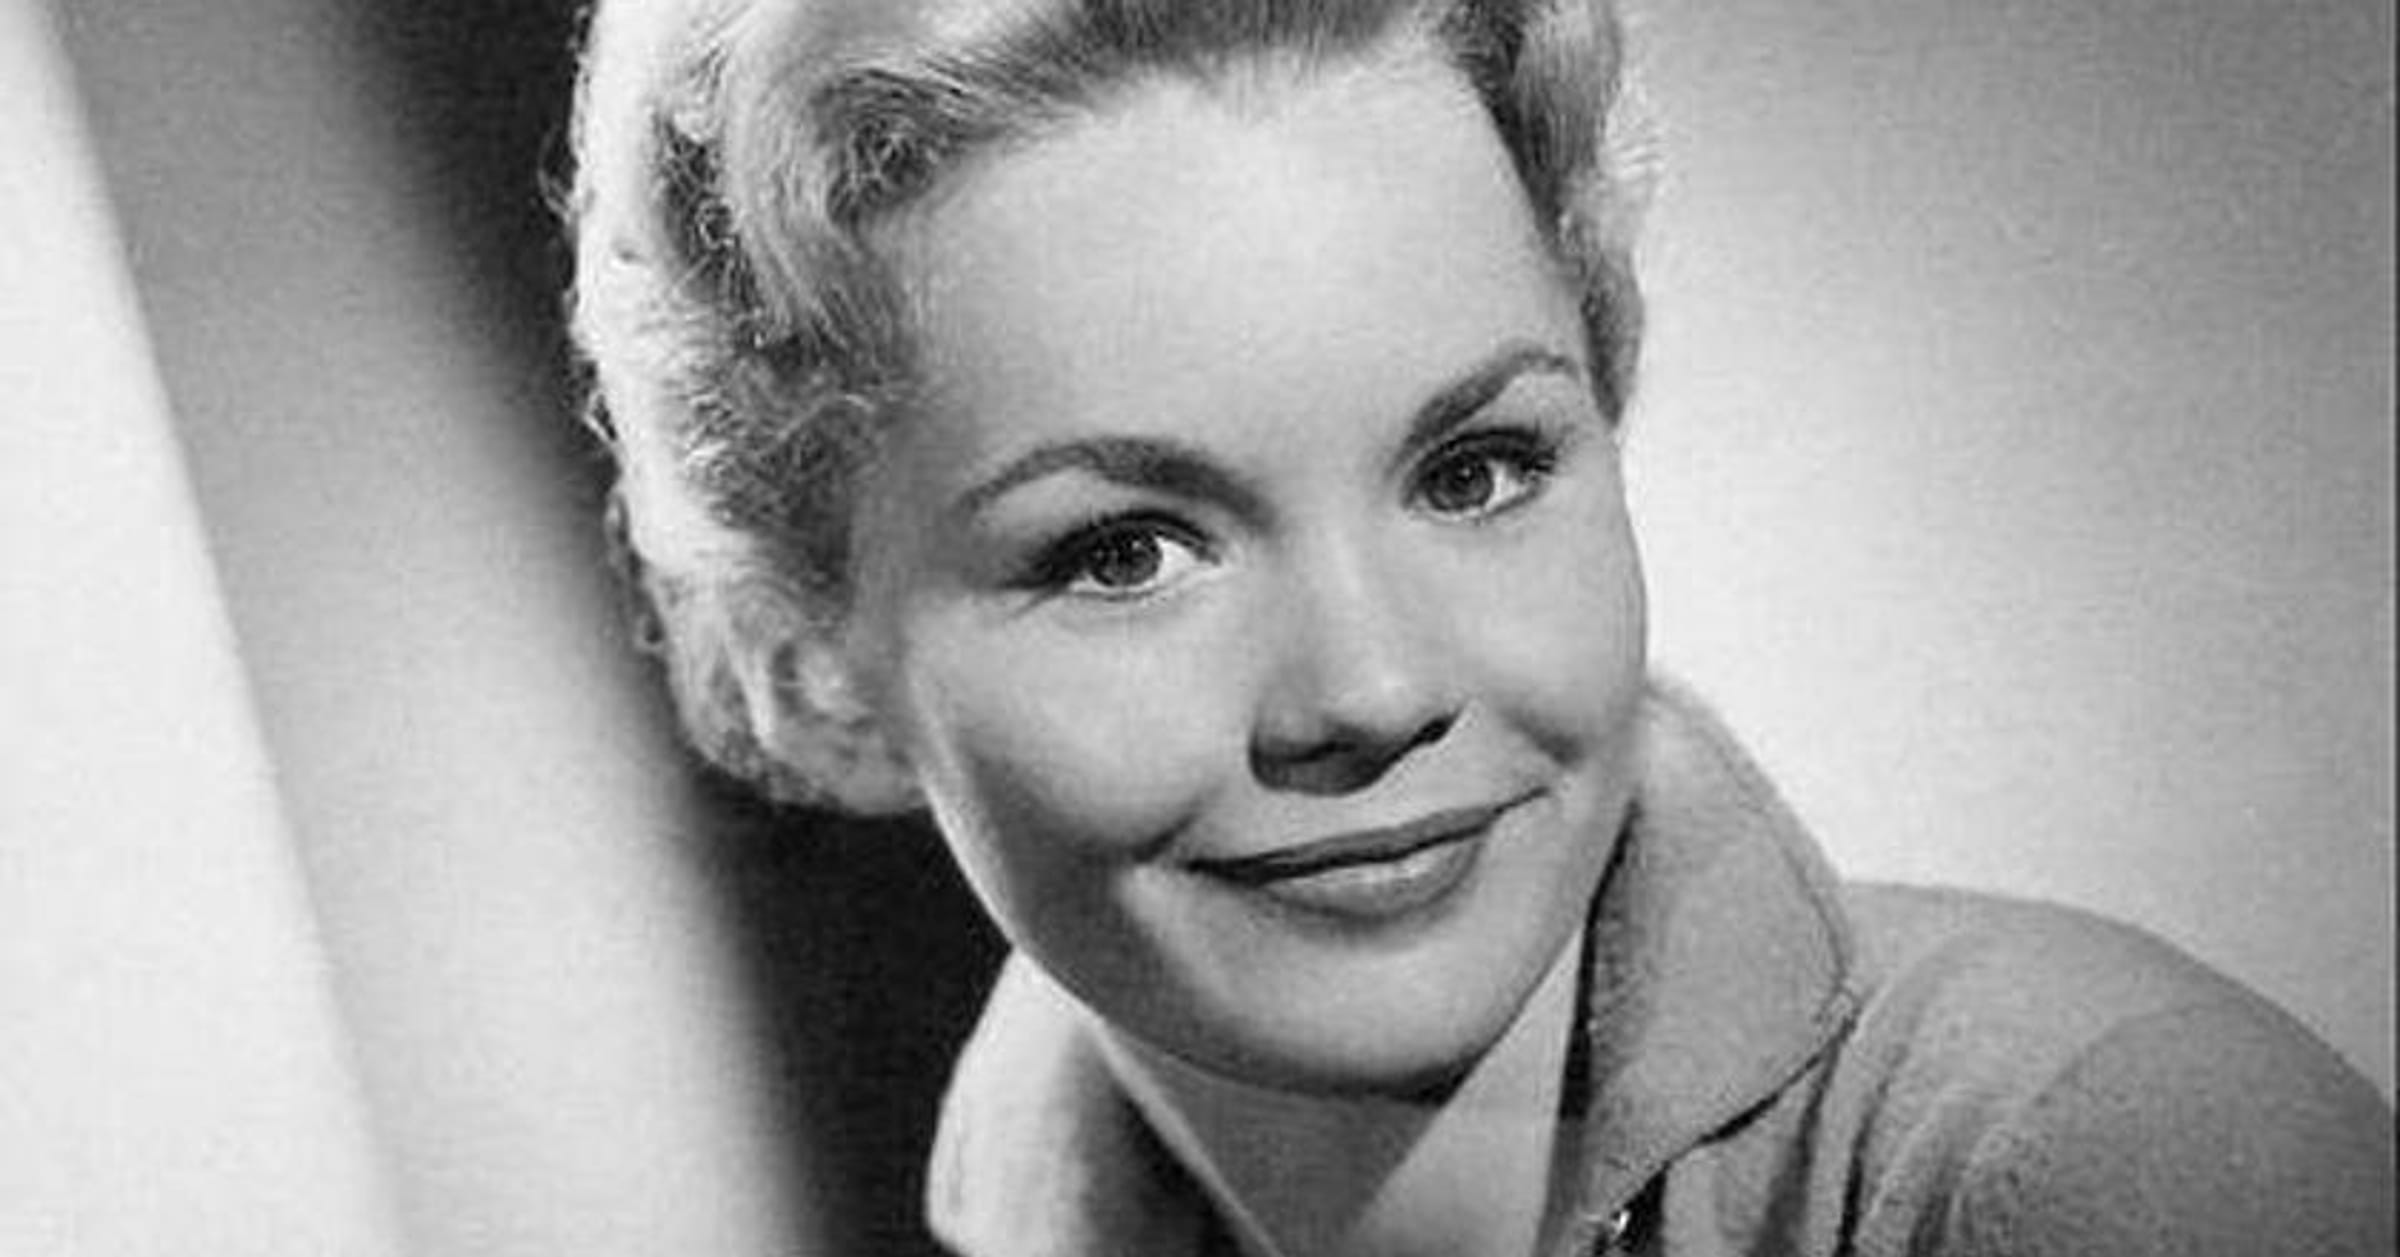 The beautiful and The best - Tuesday Weld, American actress, in